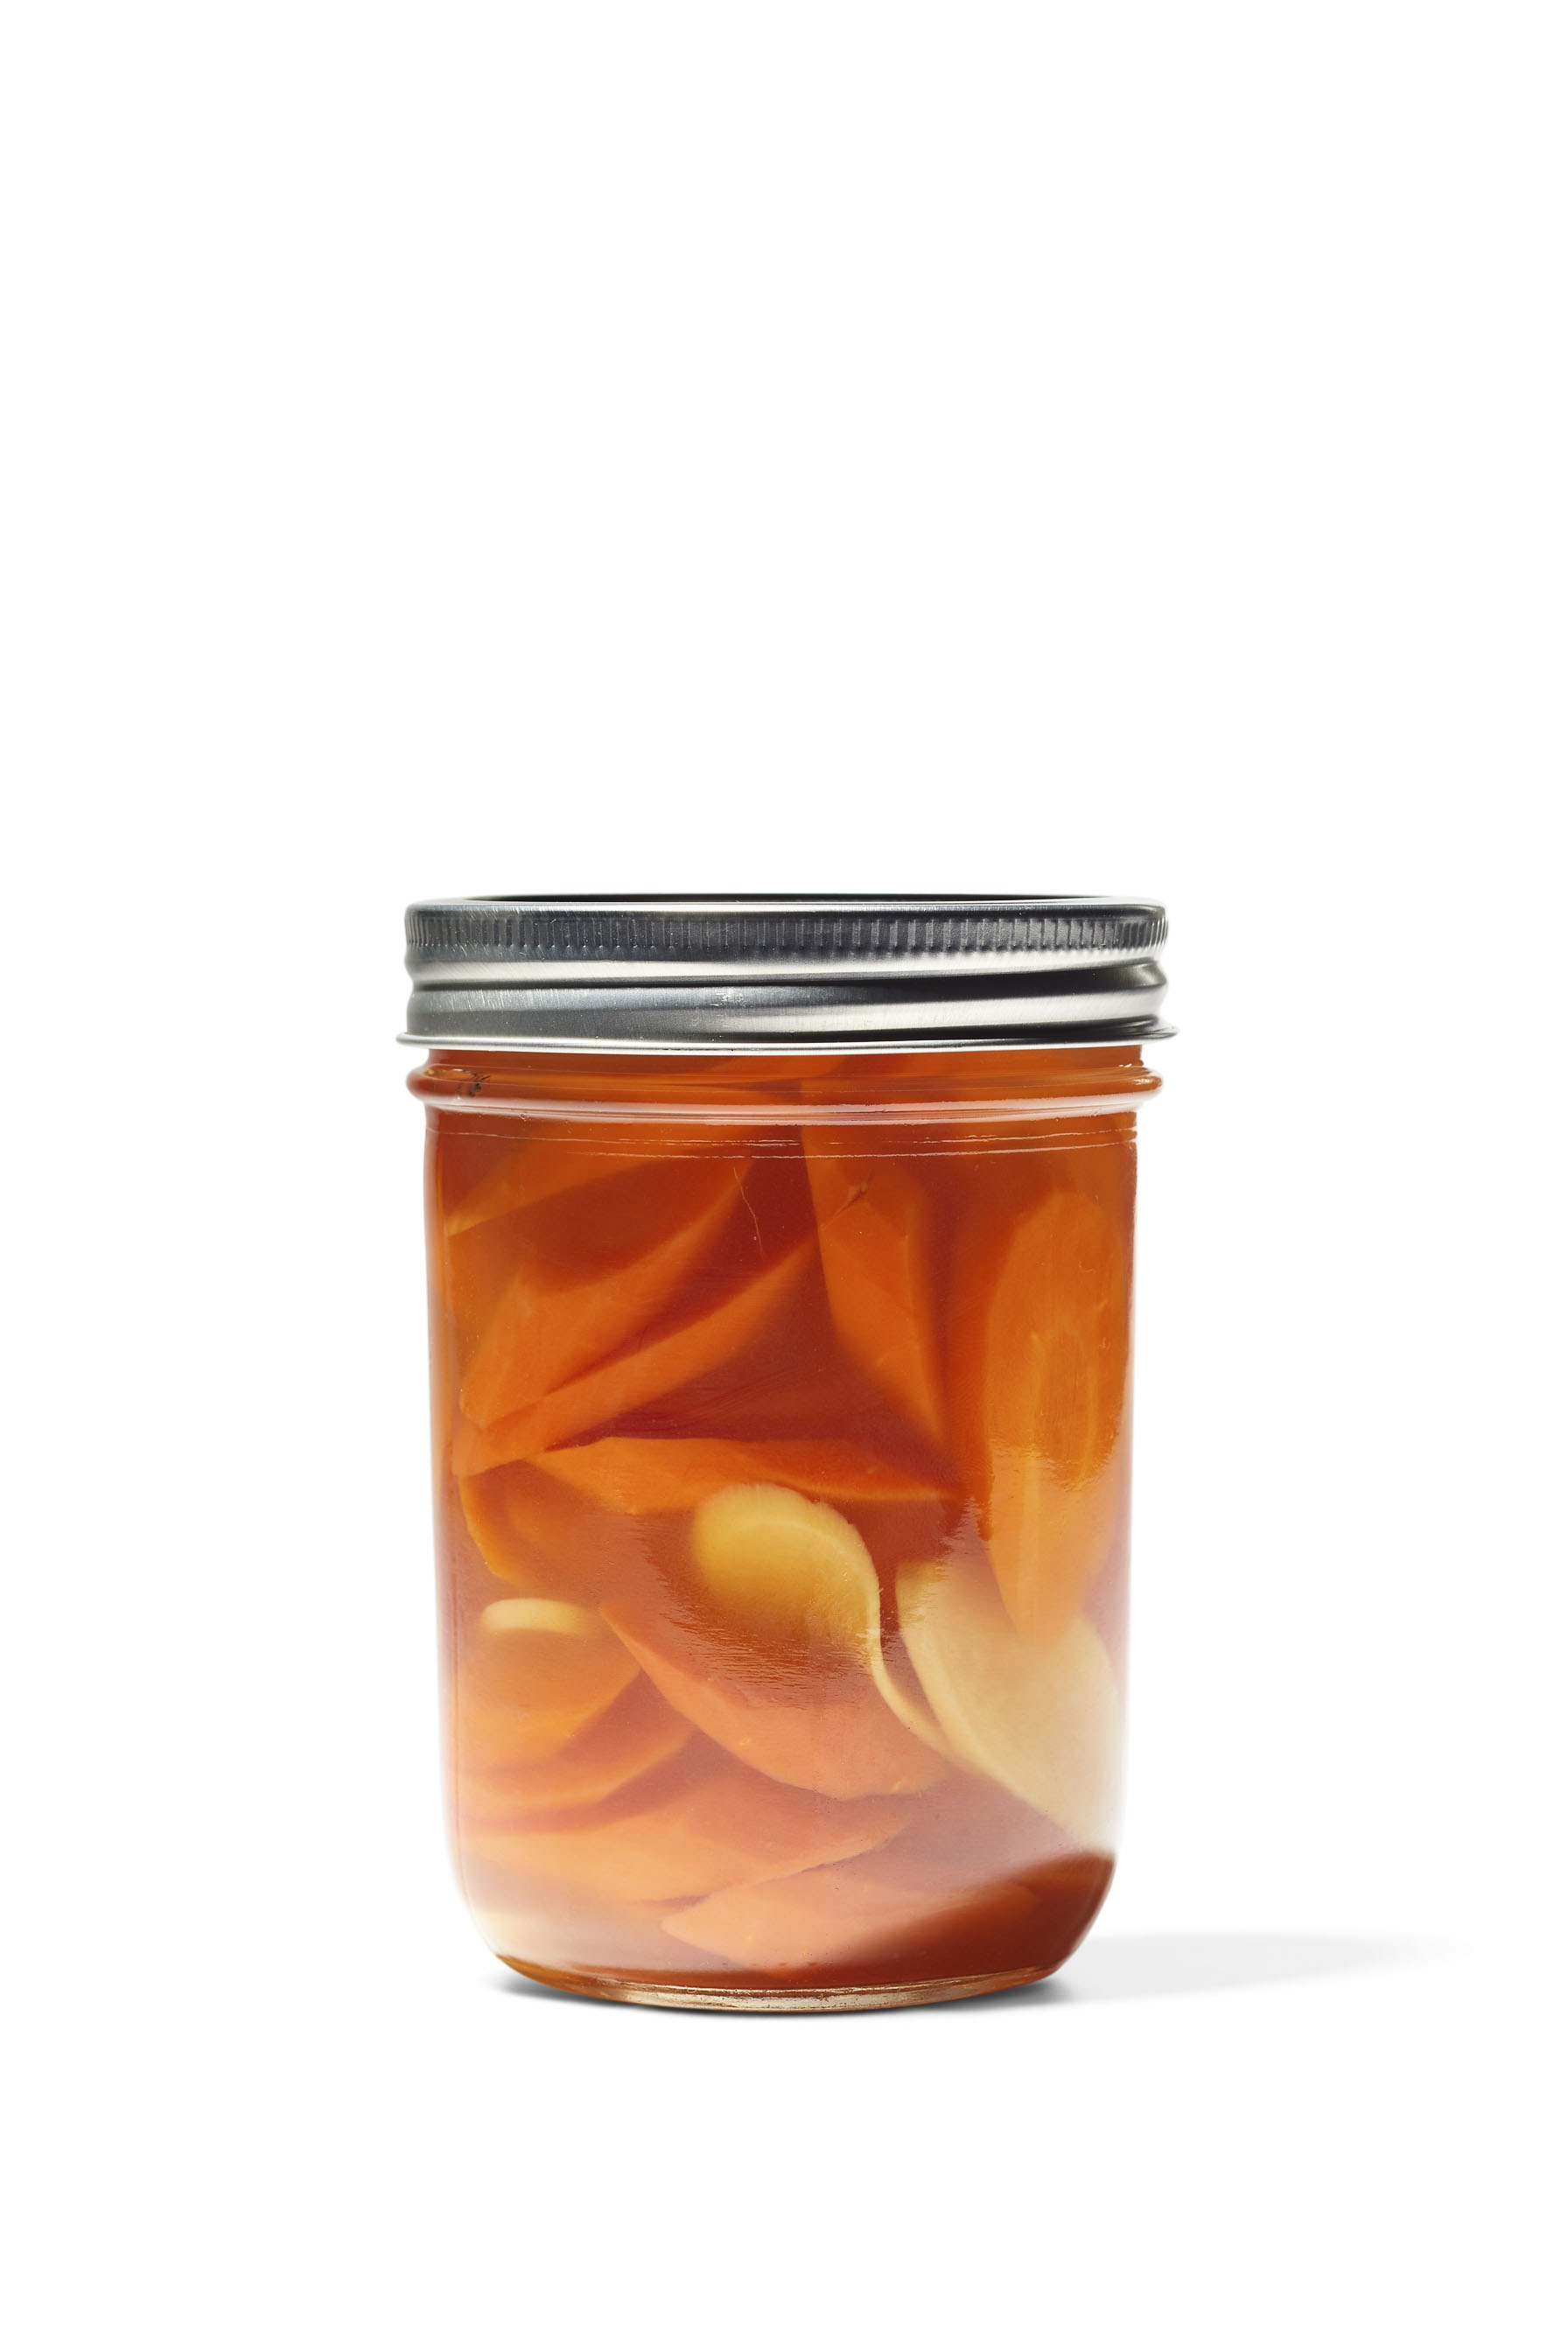 Gingery Pickled Carrot Coins_image